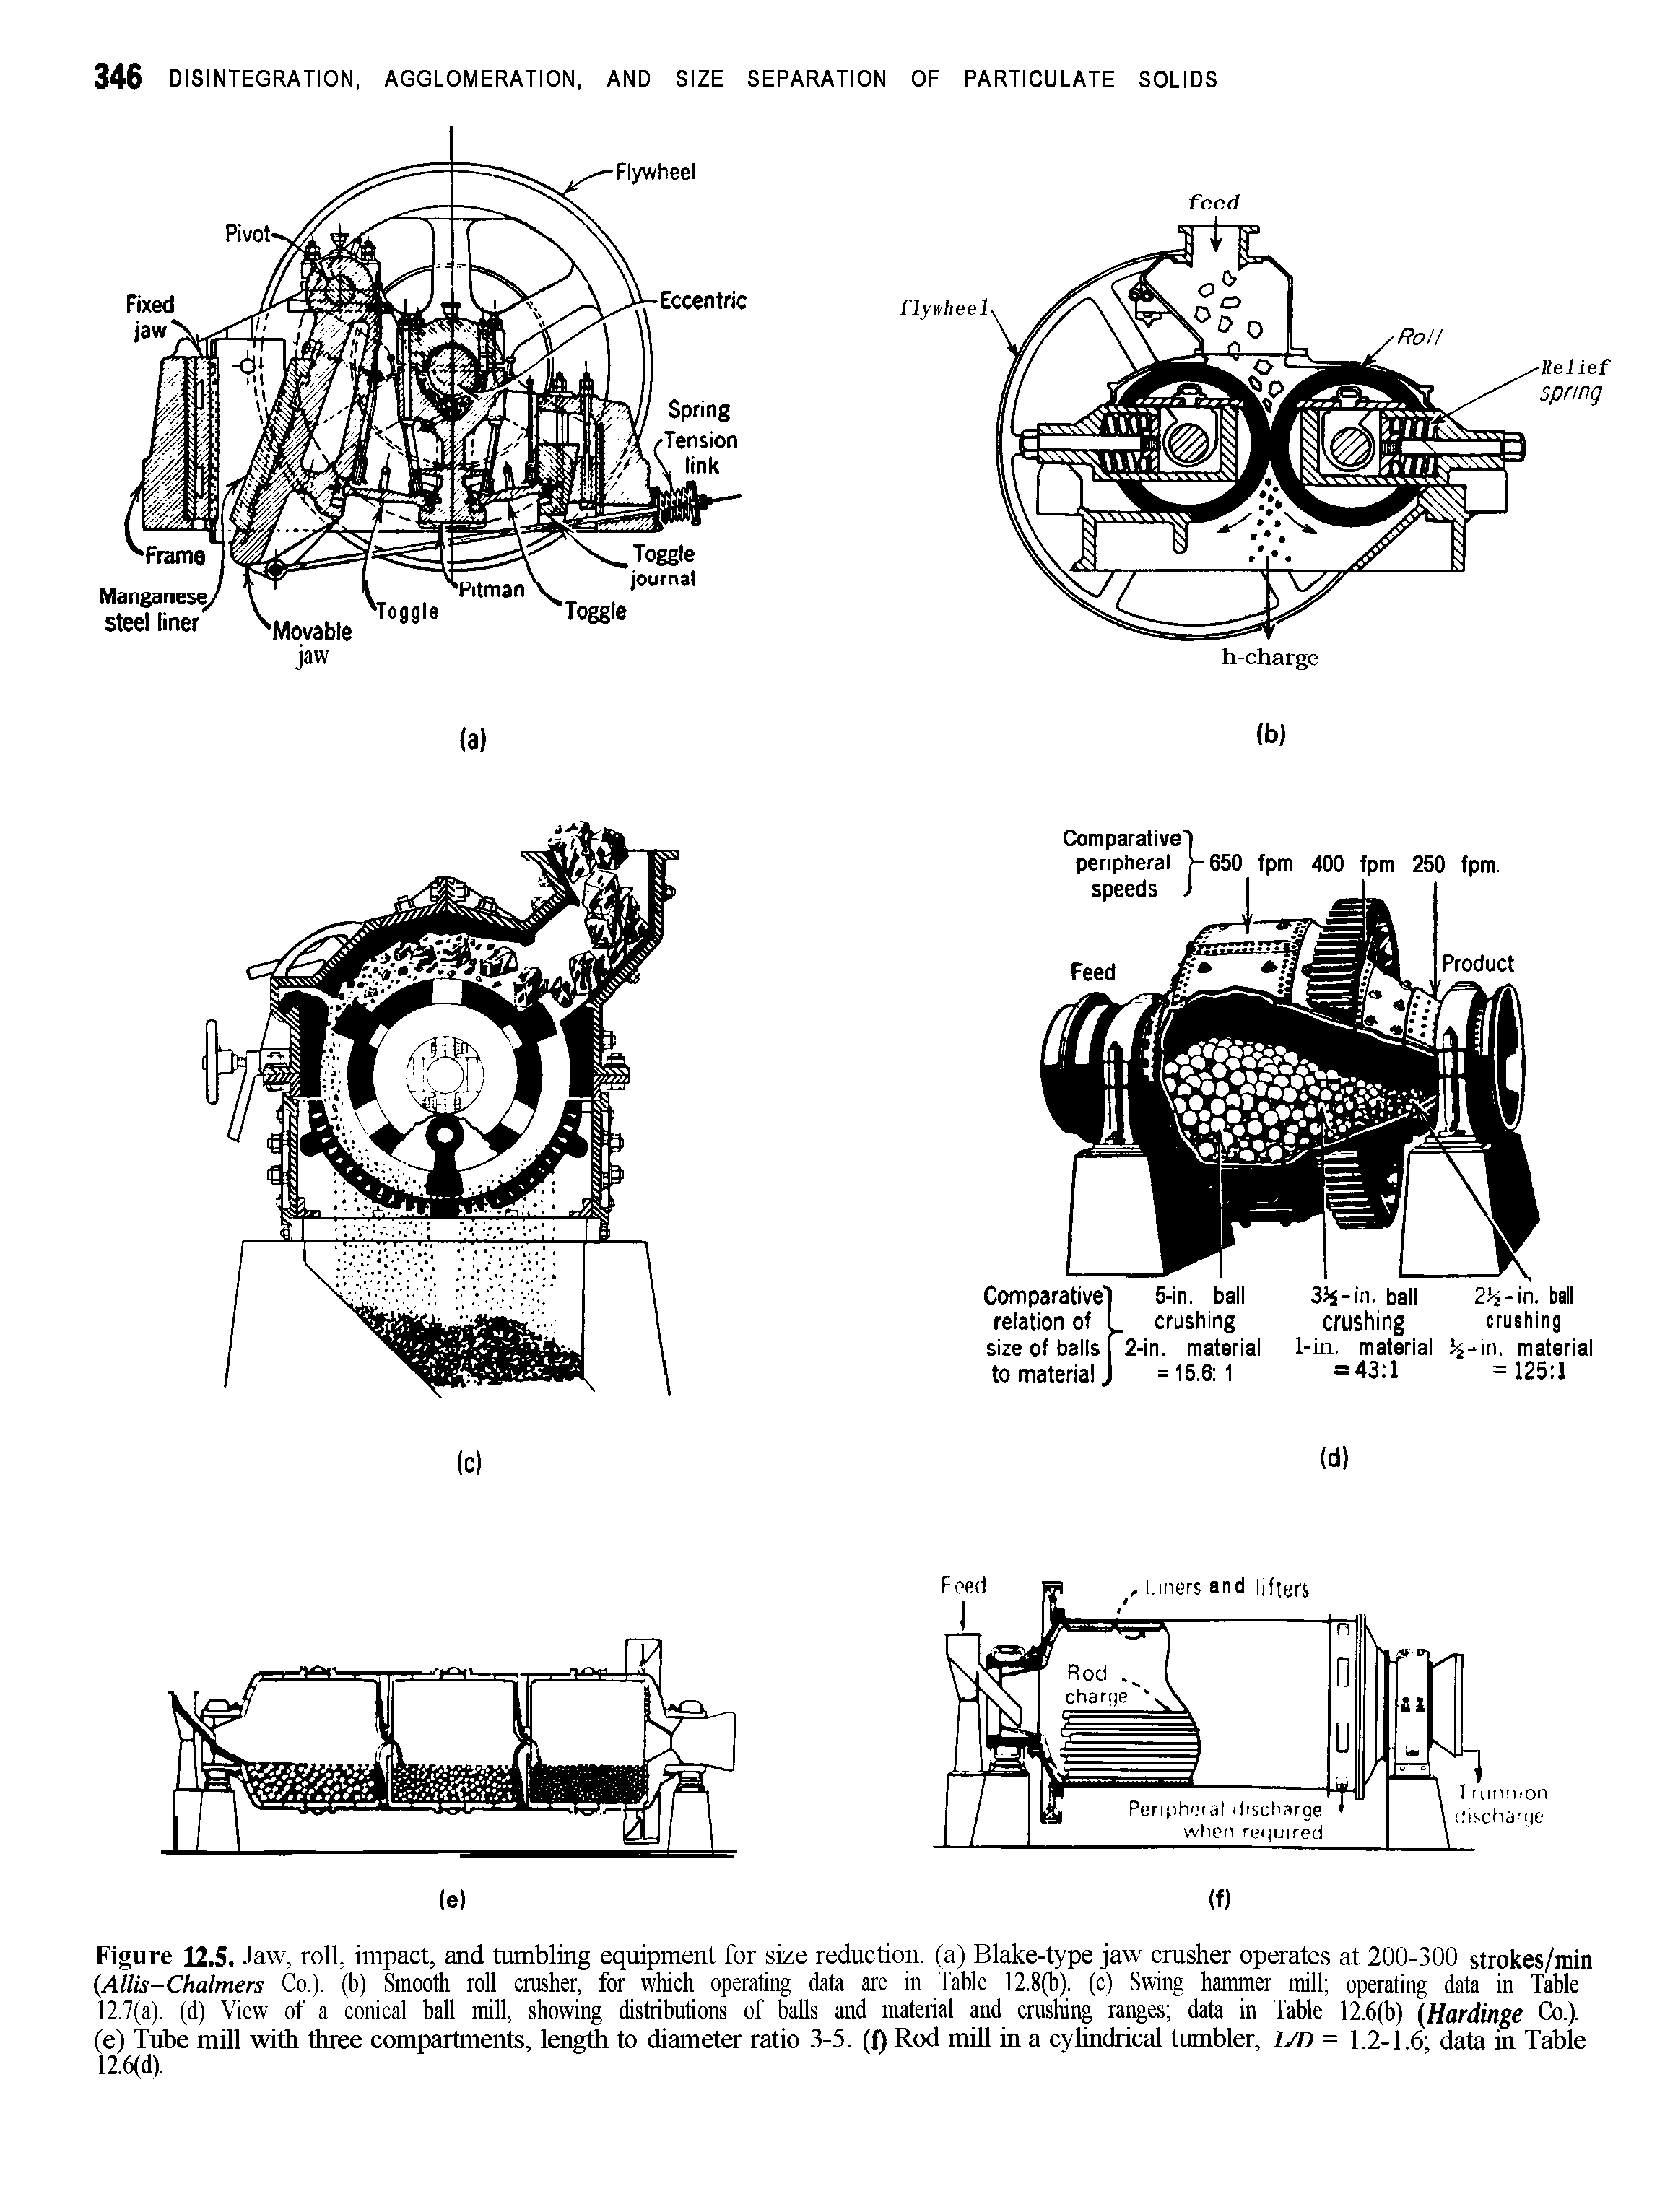 Figure 12.5. Jaw, roll, impact, and tumbling equipment for size reduction, (a) Blake-type jaw crusher operates at 200-300 strokes/min (Allis-Chalmers Co.), (b) Smooth roll crusher, for which operating data are in Table 12.8(b). (c) Swing hammer mill operating data in Table 12.7(a). (d) View of a conical ball mill, showing distributions of balls and material and crushing ranges data in Table 12.6(b) (Hardinge Co.), (e) Tube mill with three compartments, length to diameter ratio 3-5. (f) Rod miU in a cylindrical tumbler, L/D = 1.2-1.6 data in Table 12.6(d).